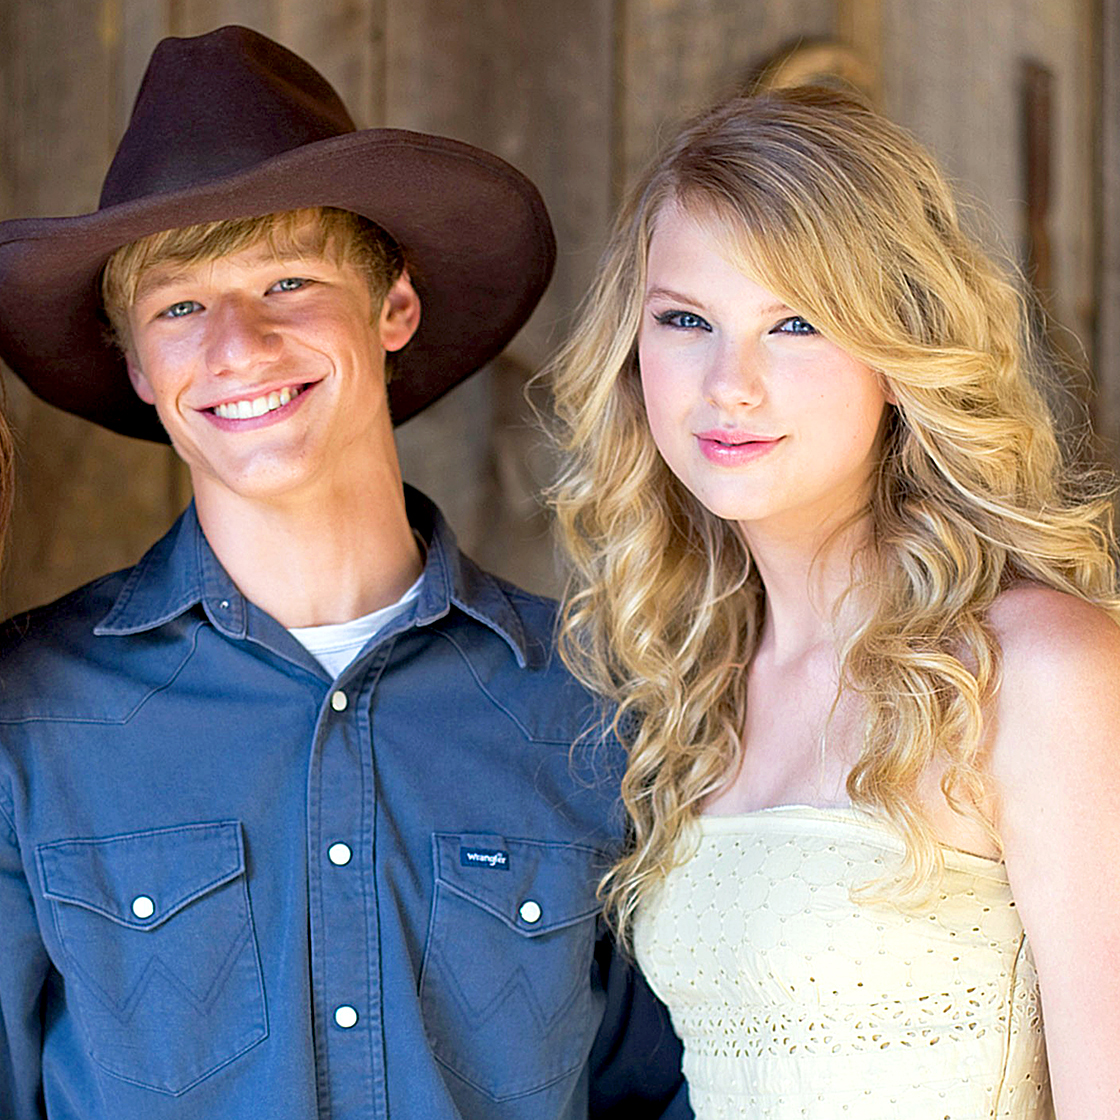 Who was Taylor Swift's first lover?